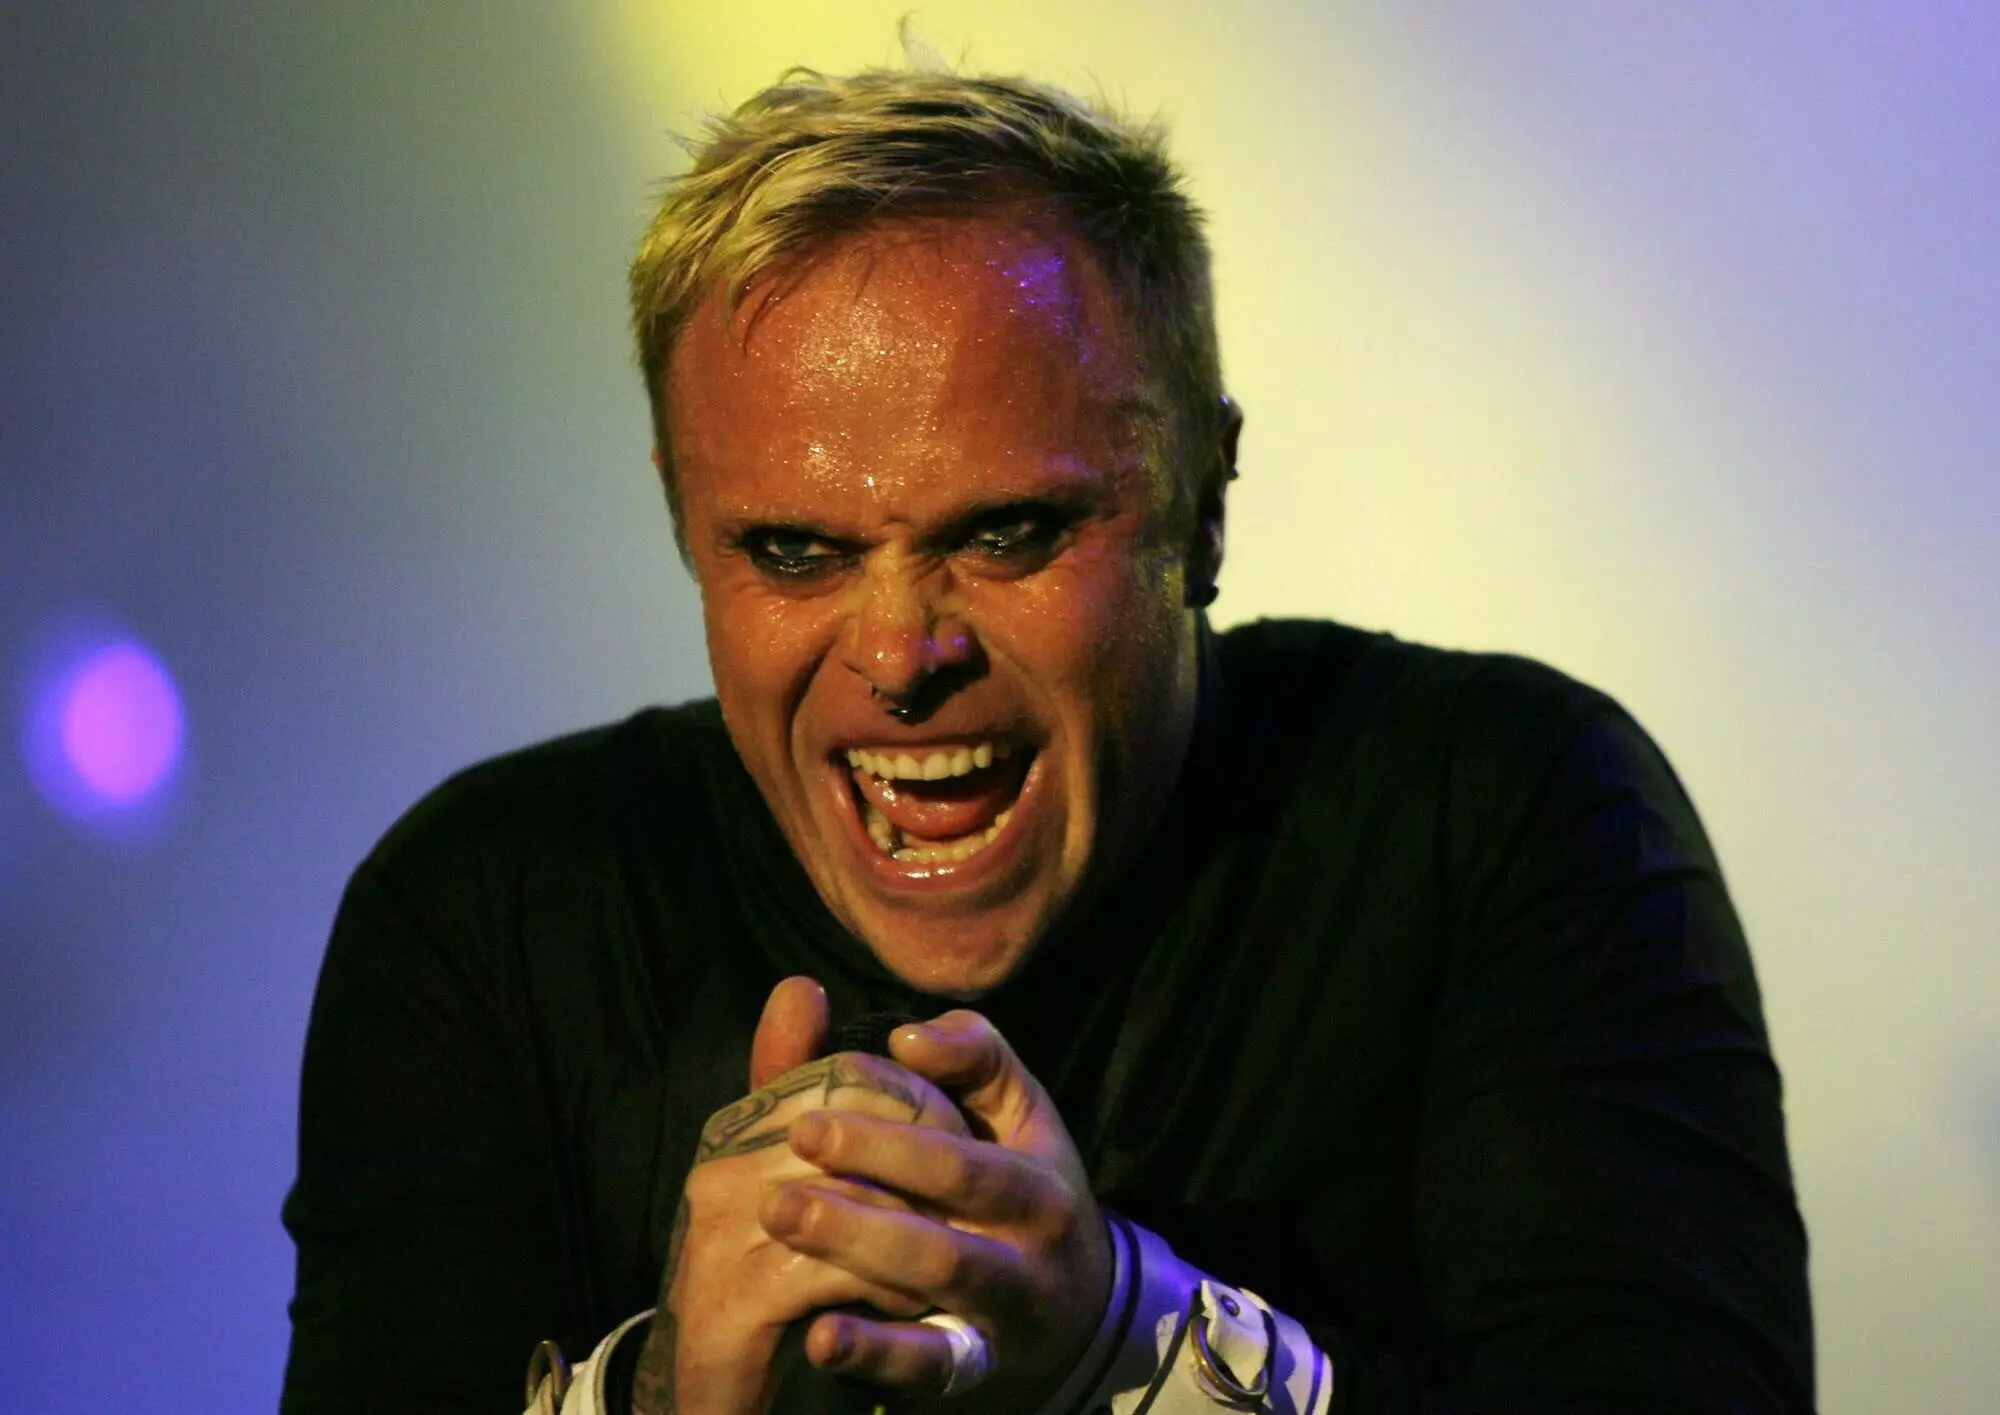 Keith Flint on stage.